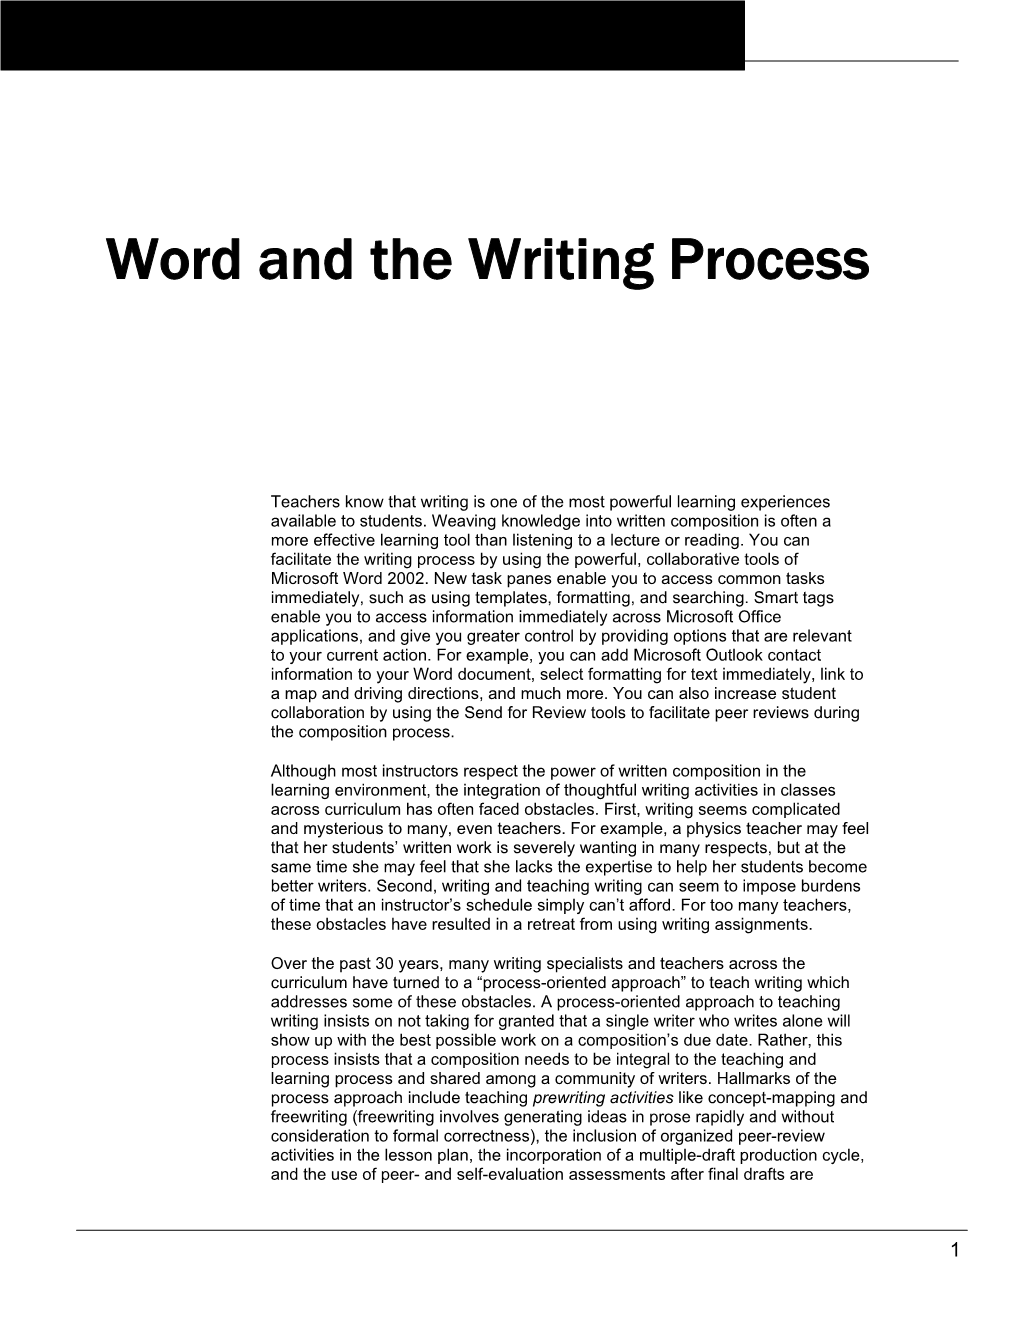 Word and the Writing Process